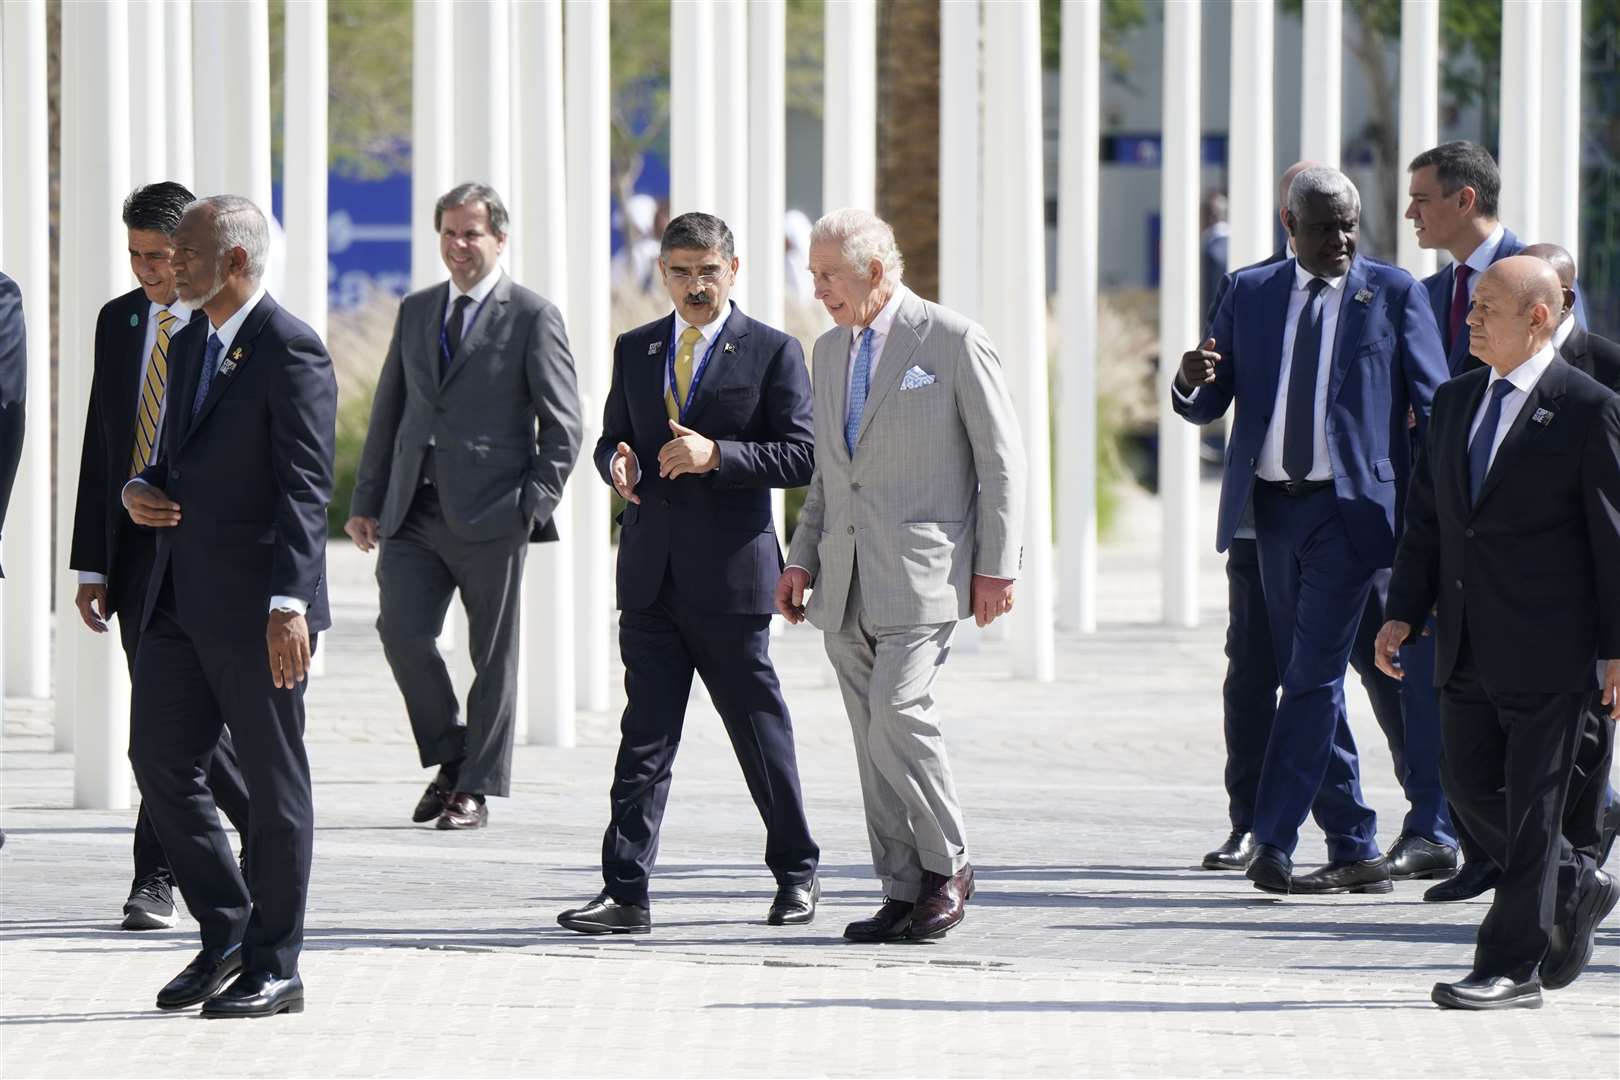 Charles joined world leaders in walking to the World Climate Action Summit in Dubai (Andrew Matthews/PA)